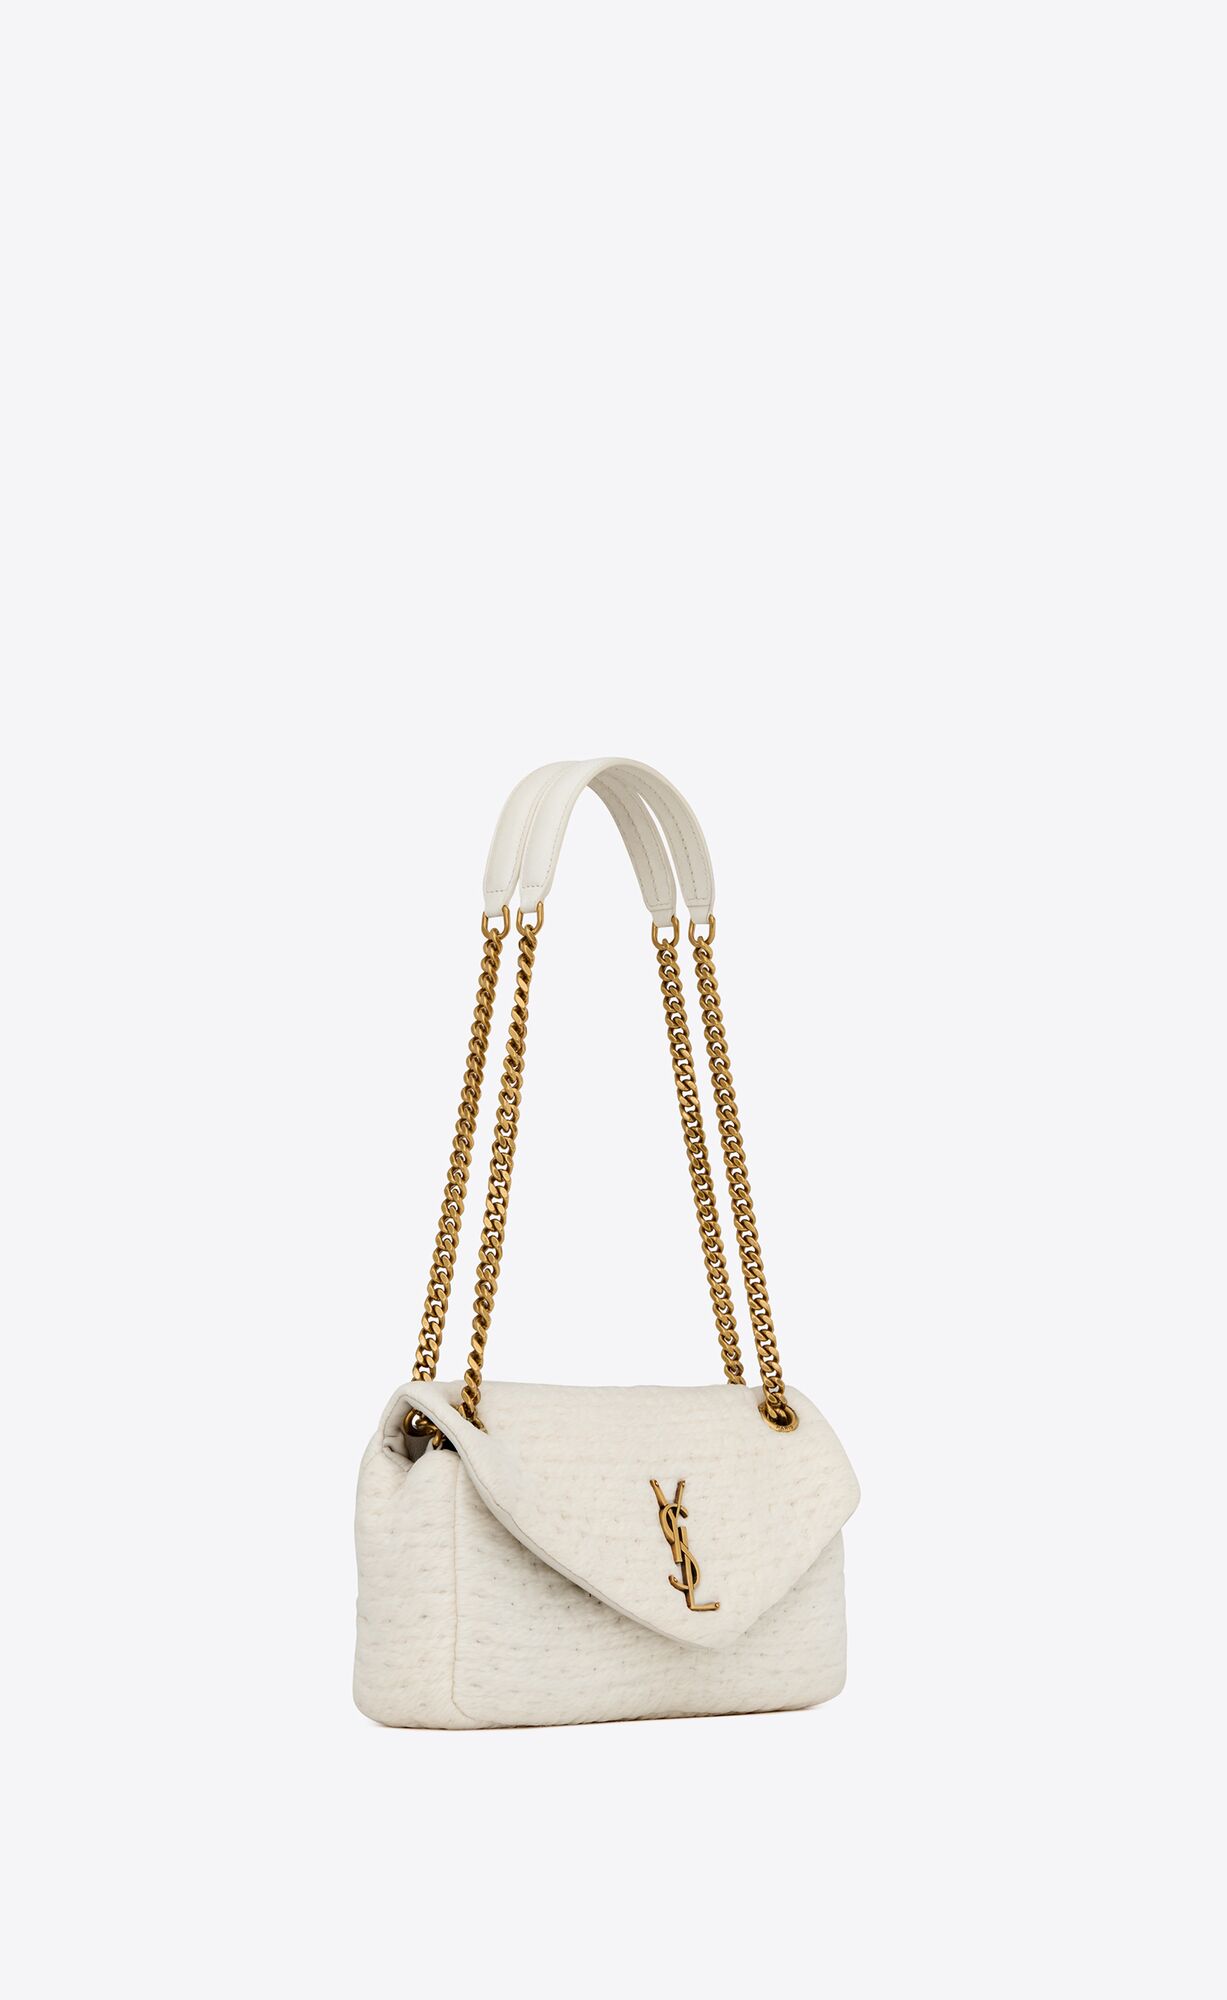 CALYPSO CHAIN BAG IN QUILTED ORGANZA AND LAMBSKIN | Saint Laurent | YSL.com